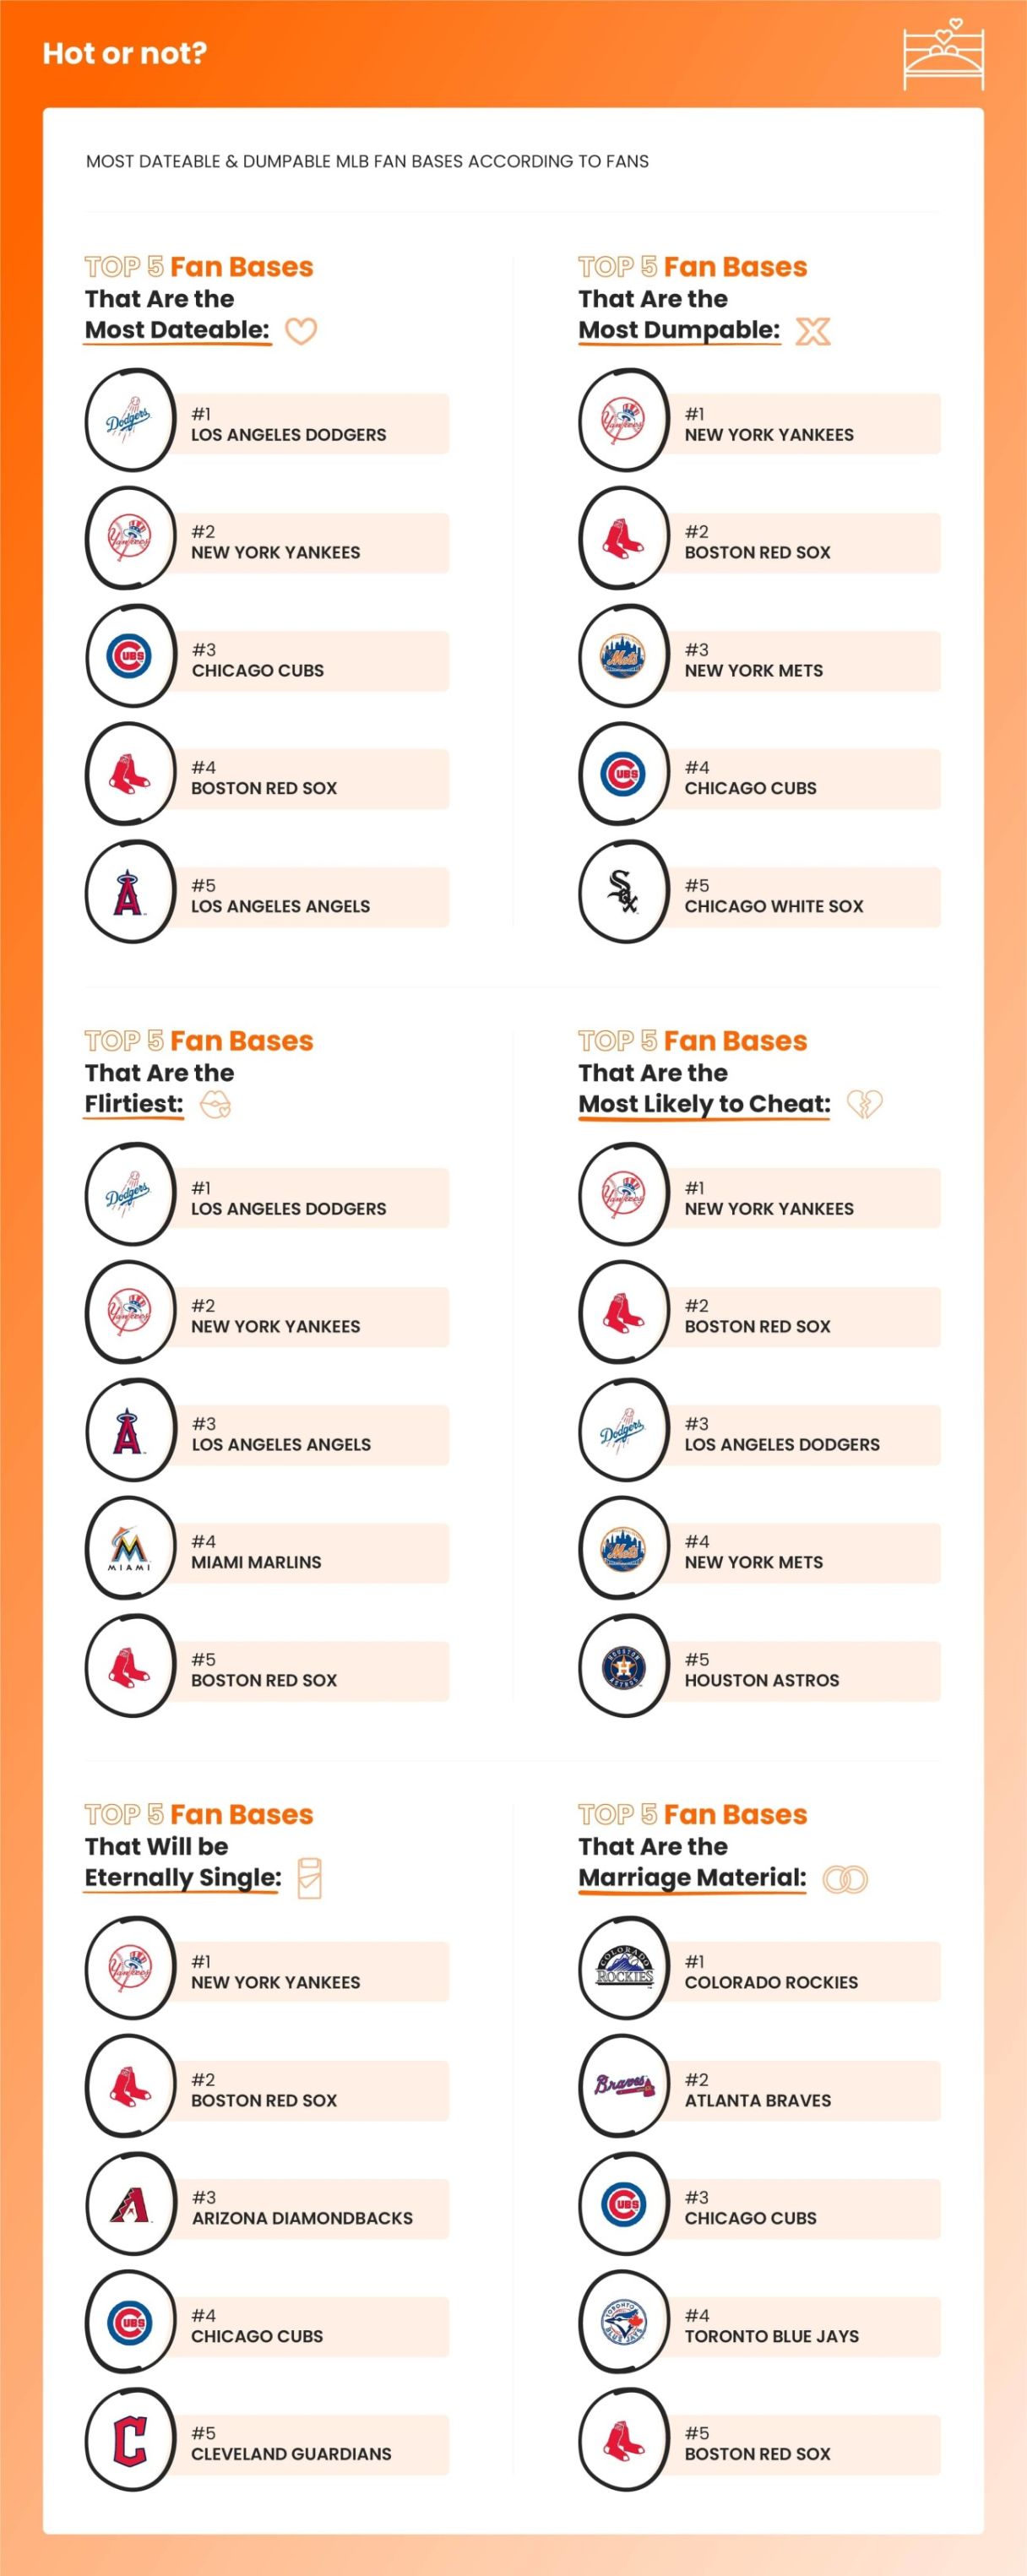 Content Marketing Infographic - Hot or not fanbases